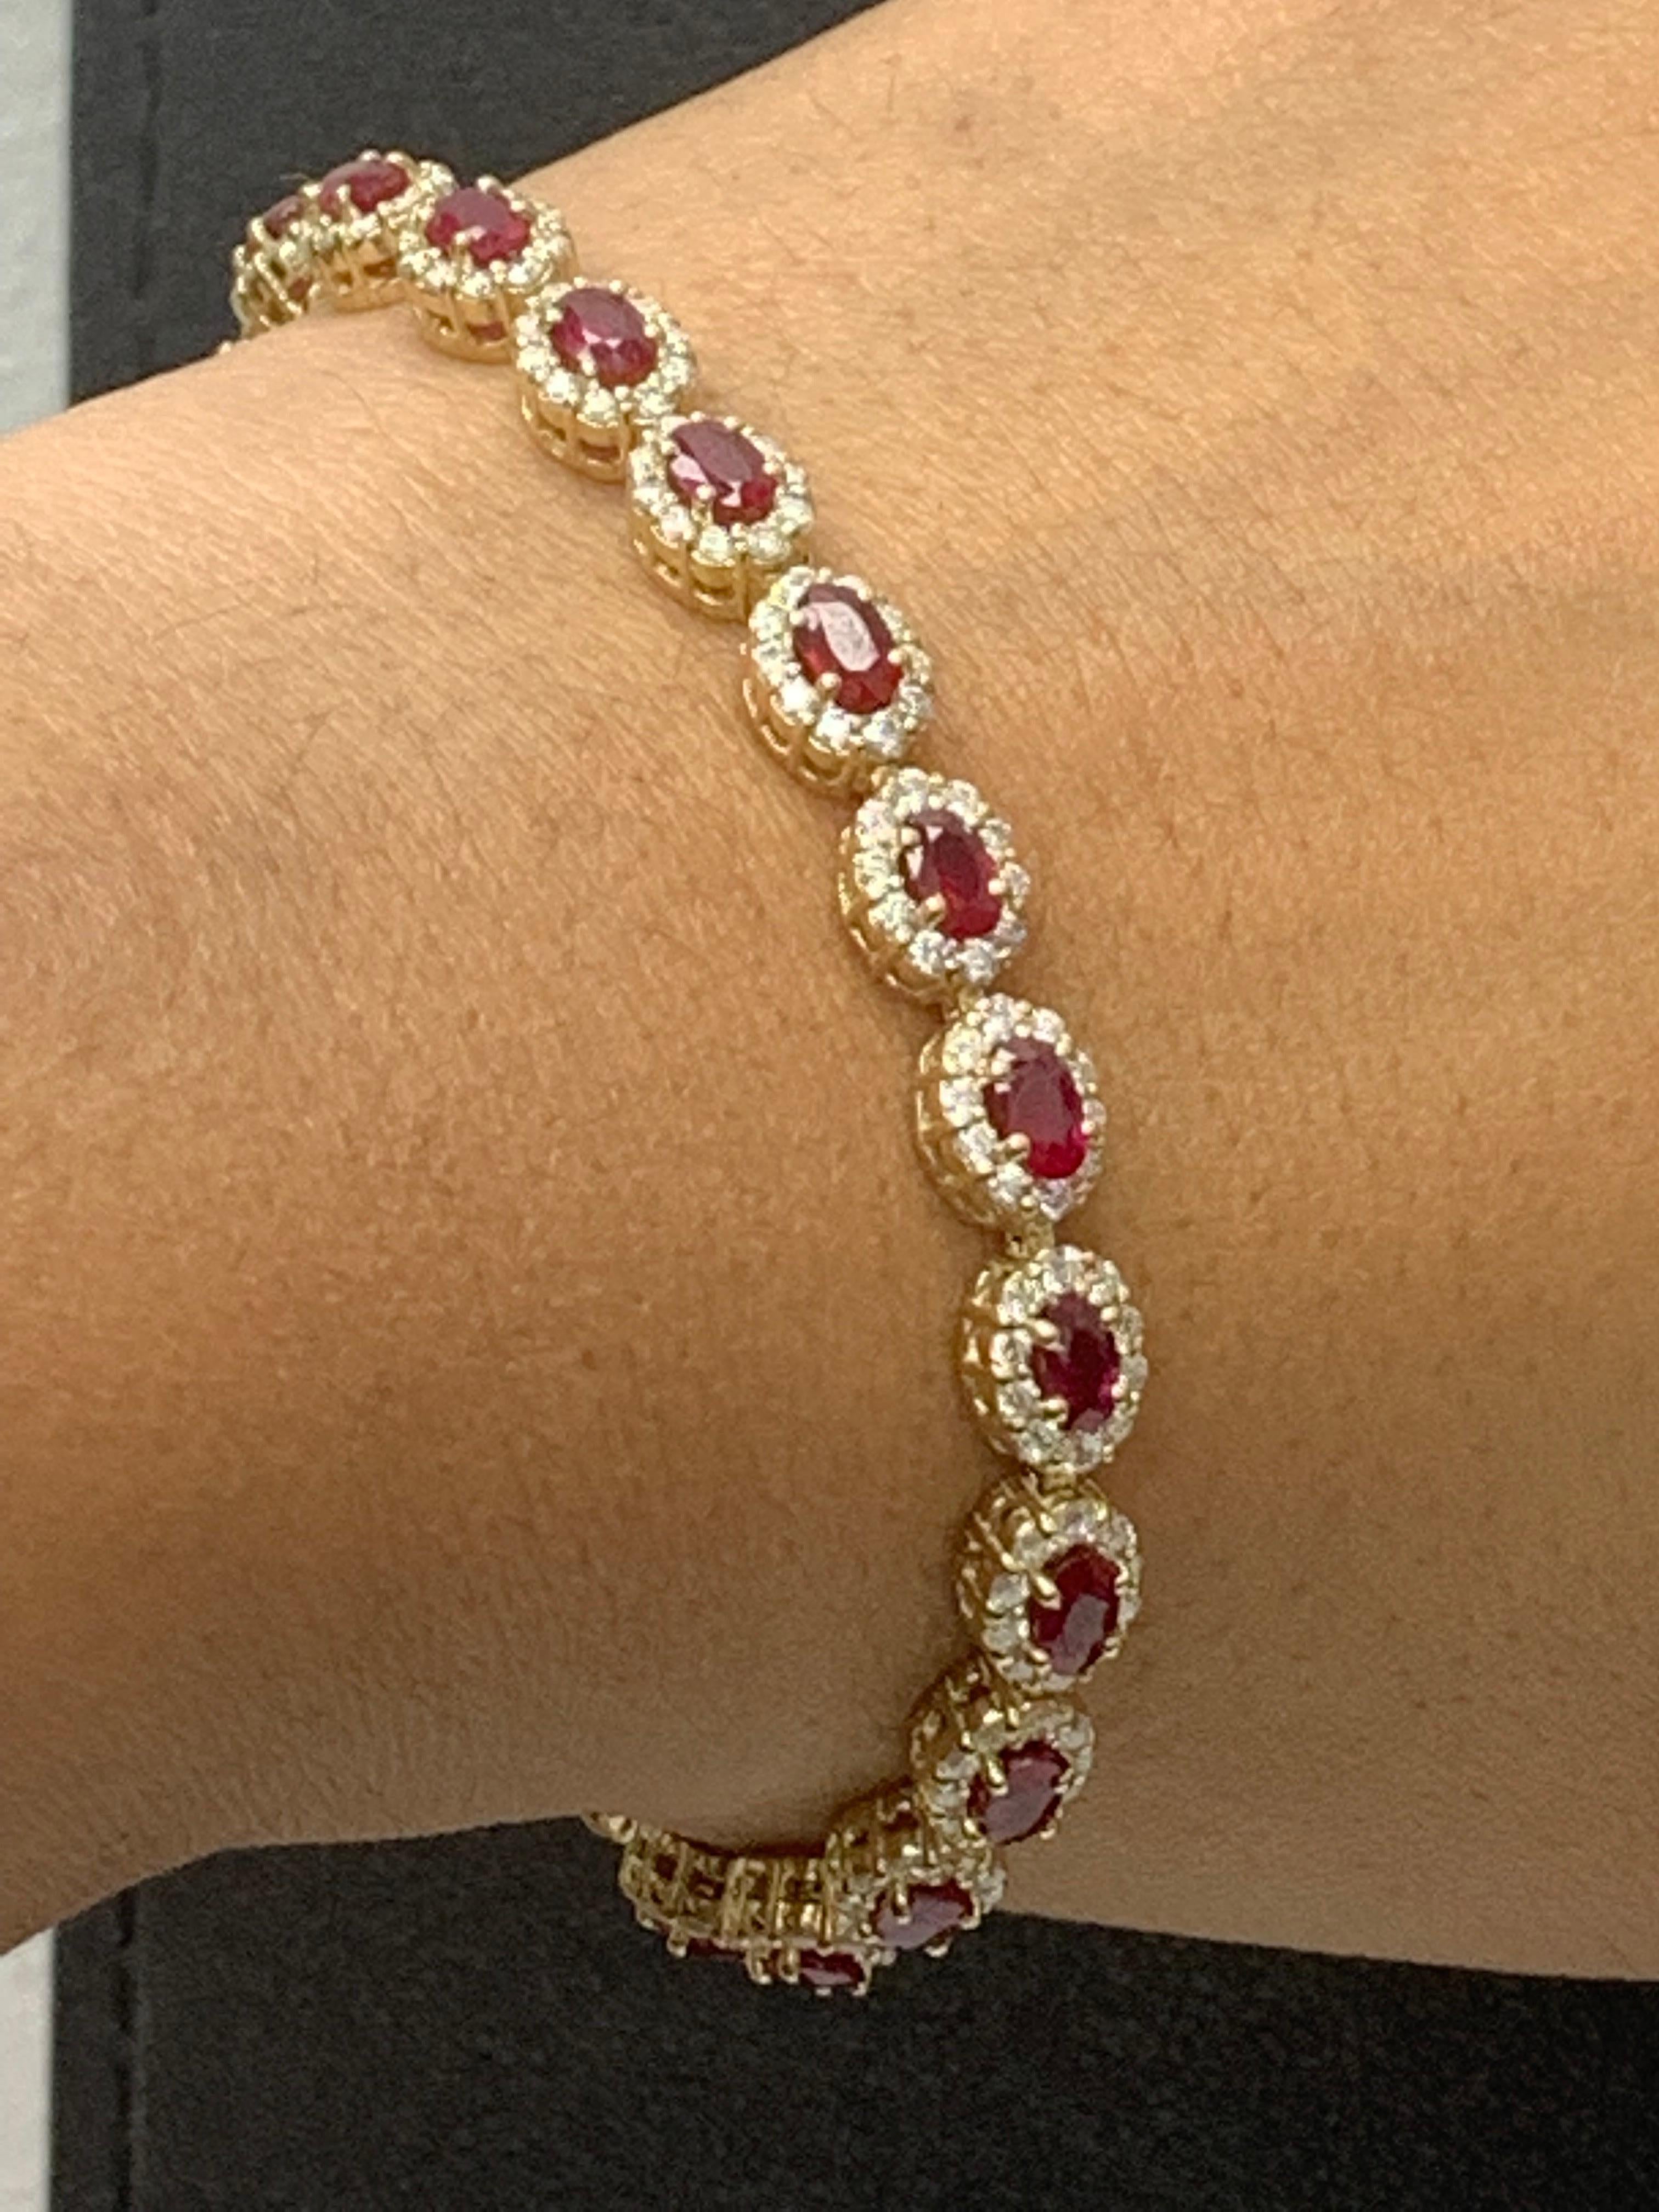 6.43 Carat Oval Cut Ruby and Diamond Halo Bracelet in 14K Yellow Gold For Sale 2